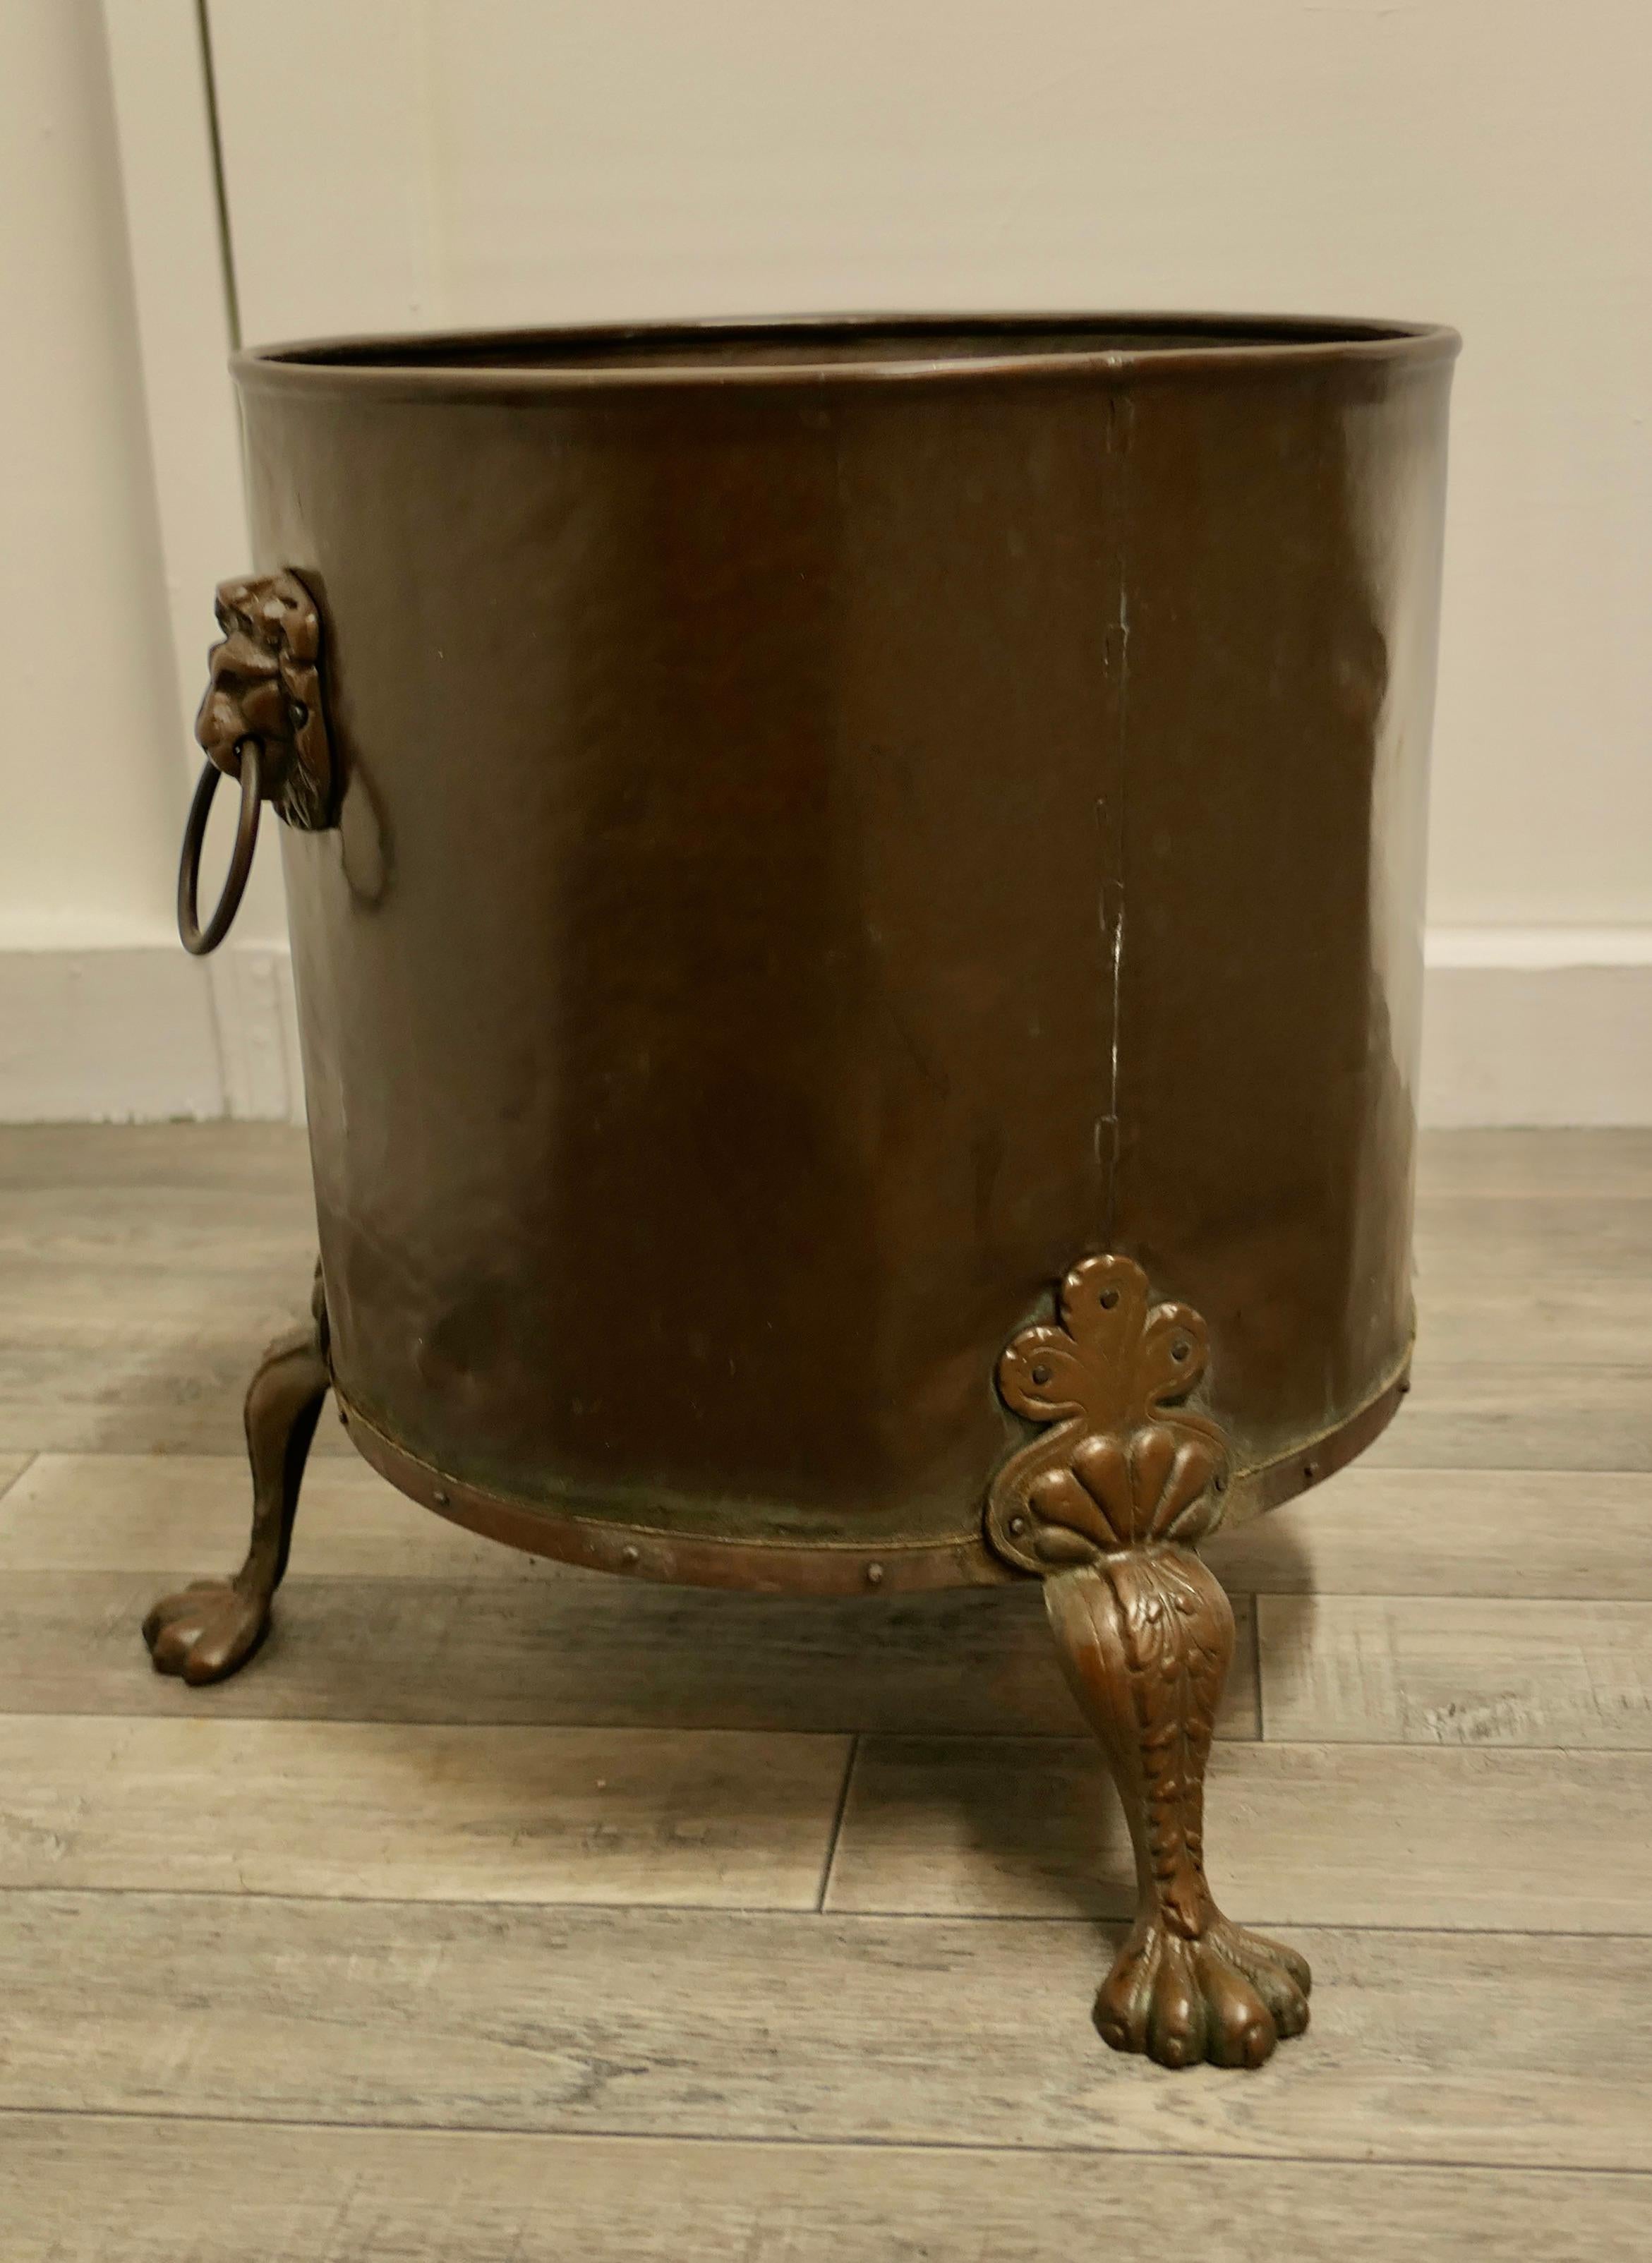 19th century copper coal or log bucket on lions paw feet

This is a lovely looking 19th Century bucket it has a riveted base with lions paw feet and Lions mask ring handles 
The bucket has a rolled top edge and it is in very good sound condition